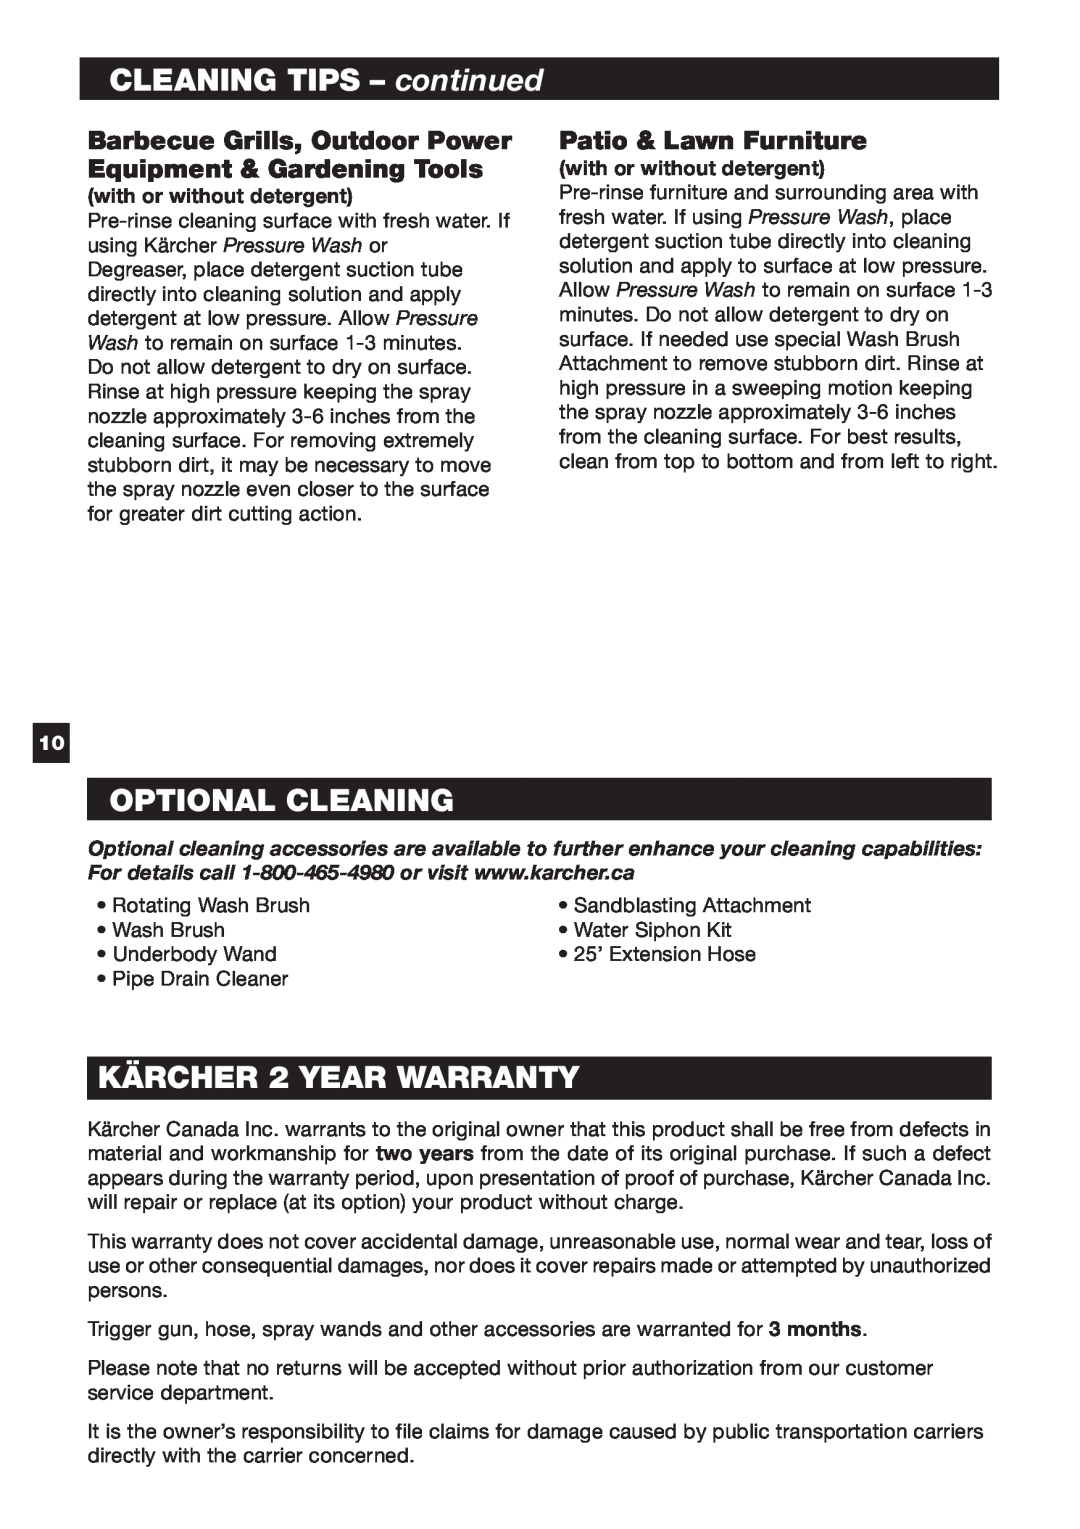 Karcher K 5.50 M CLEANING TIPS – continued, Optional Cleaning, KÄRCHER 2 YEAR WARRANTY, Patio & Lawn Furniture 